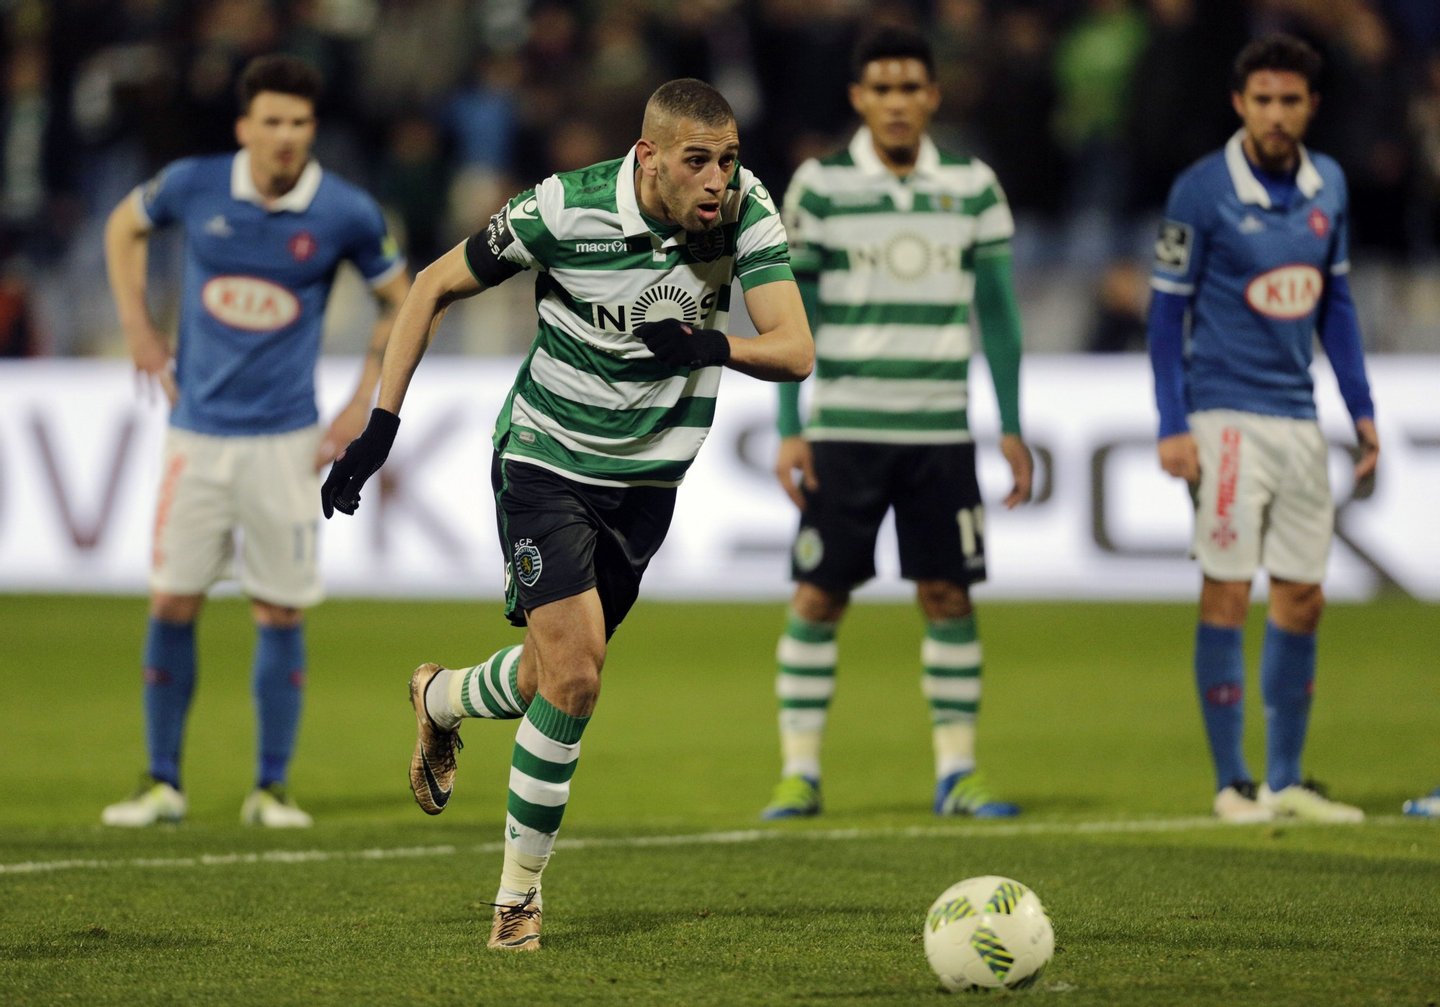 Sporting's Algerian forward Islam Slimani prepares to kick a penalty and score his second goal during the Portuguese league football match FC Belenenses vs Sporting CP at the Belem stadium in Lisbon on April 4, 2016. / AFP / JOSE MANUEL RIBEIRO (Photo credit should read JOSE MANUEL RIBEIRO/AFP/Getty Images)